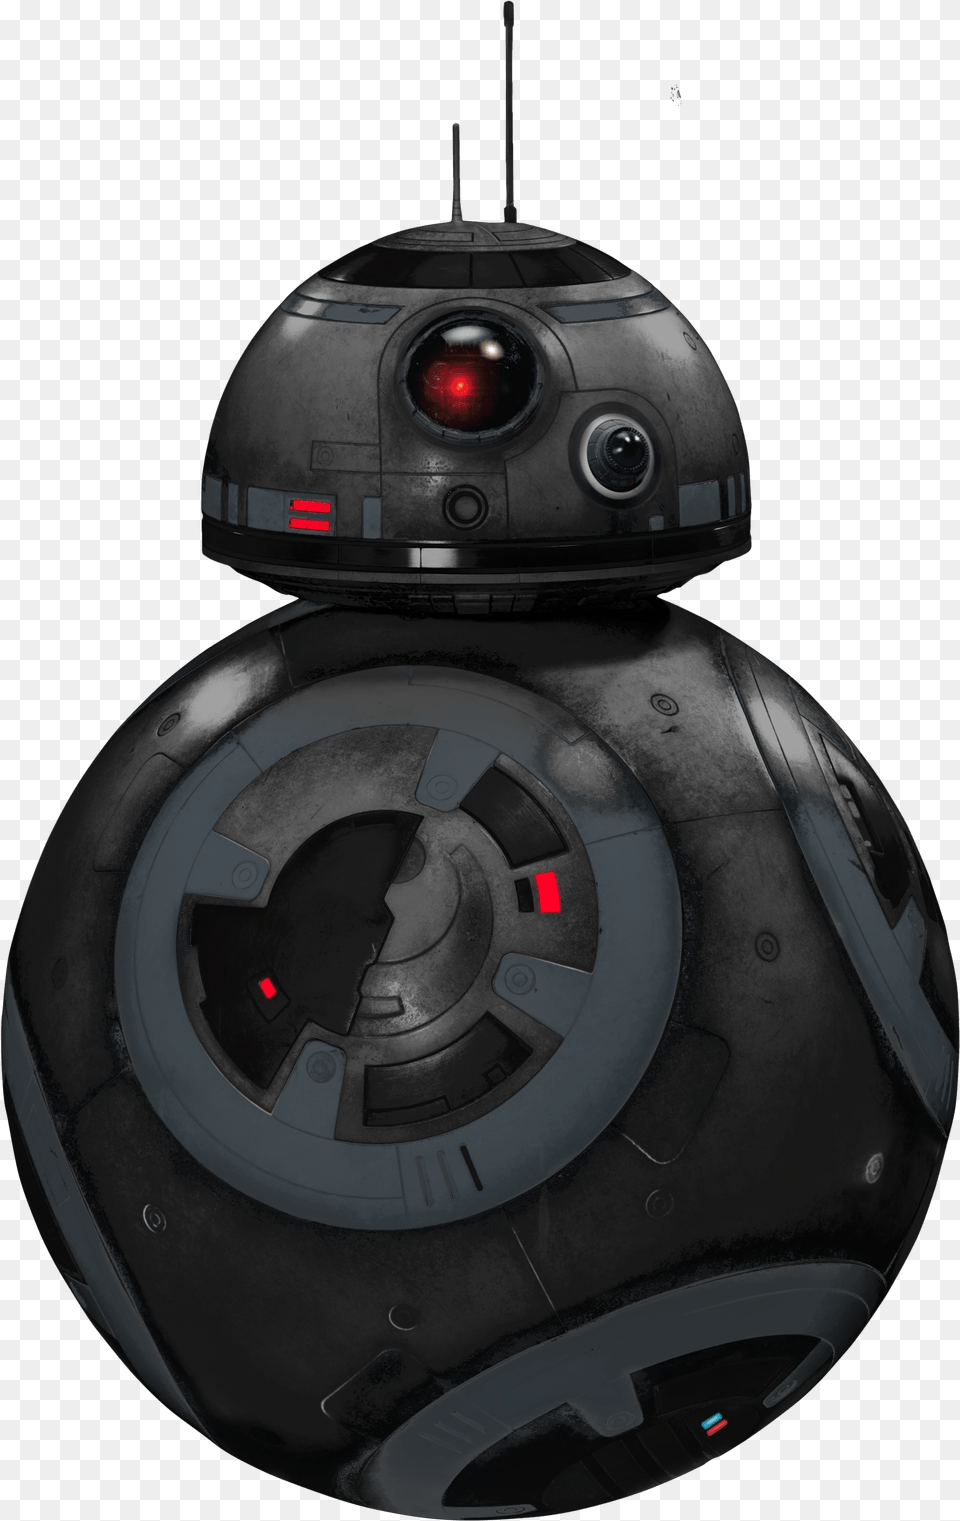 Bb 9e Droid Star Wars Ep8 The Last Jedi First Order Star Wars 8 Droids, Robot Free Png Download